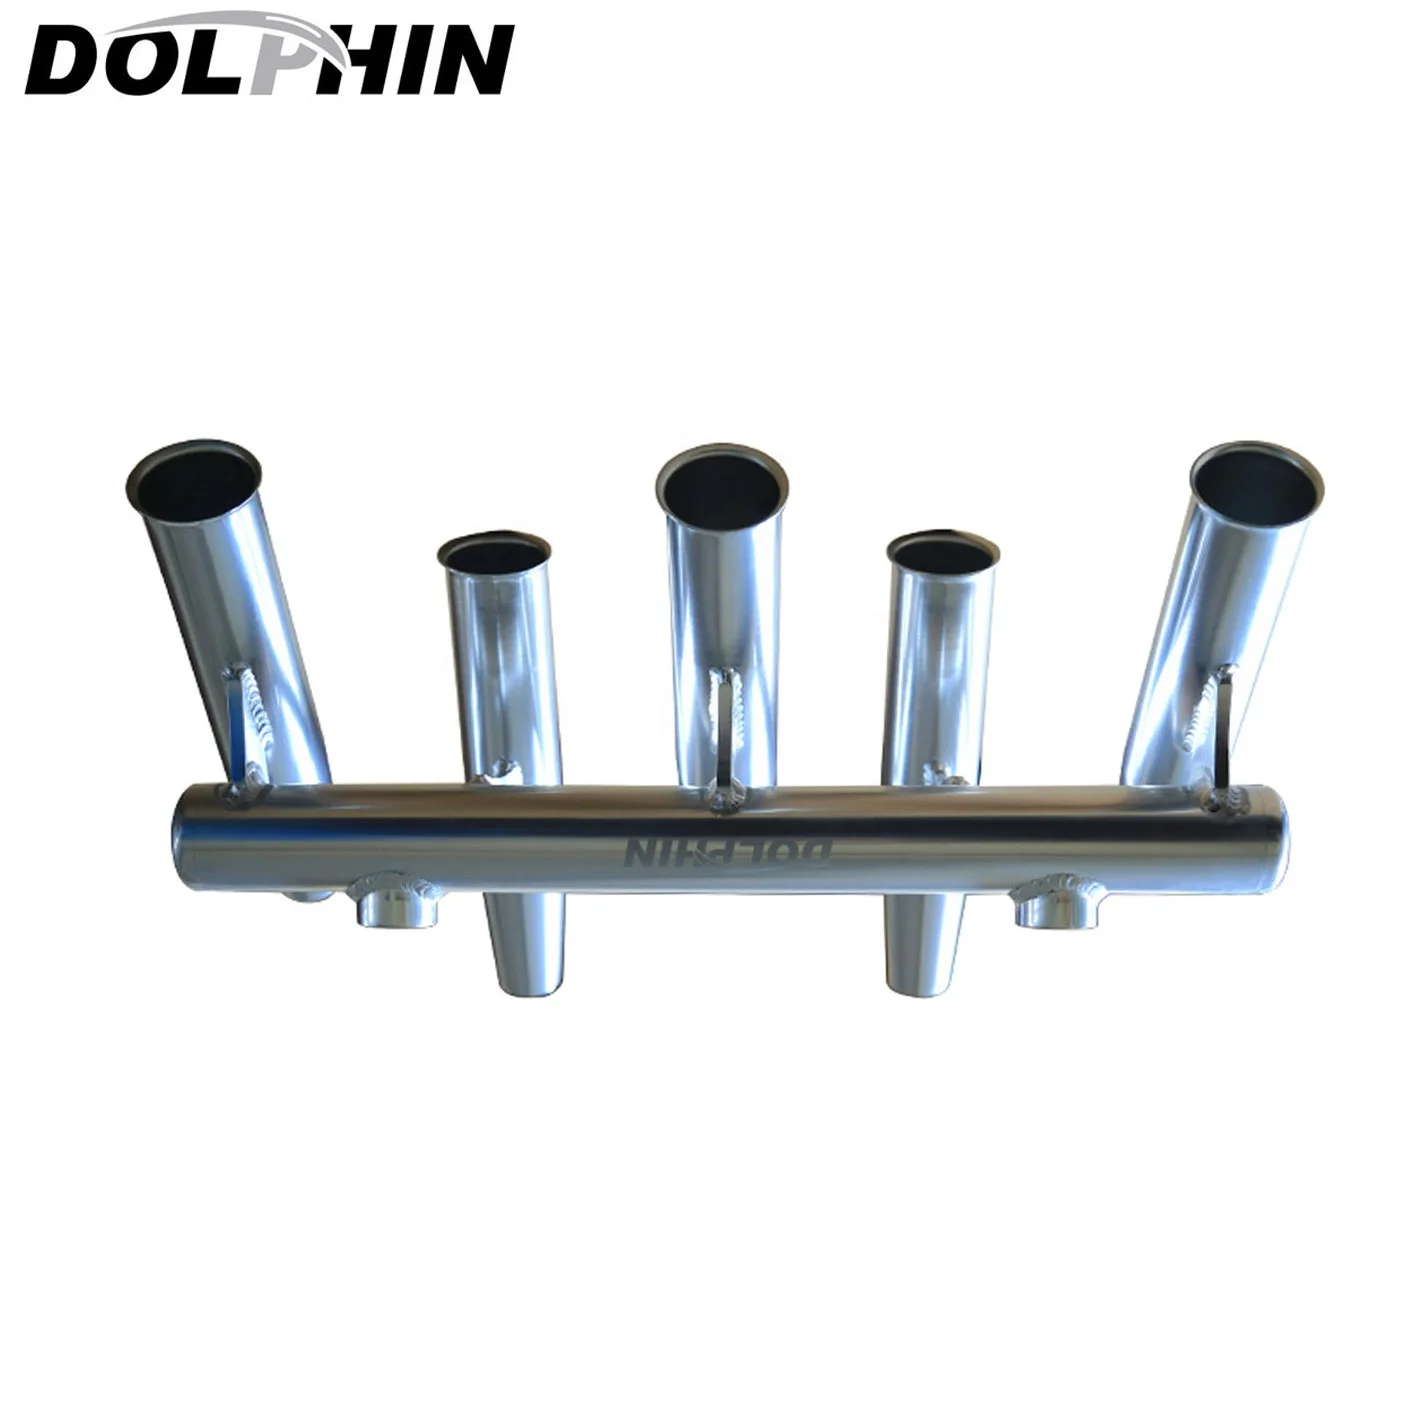 

Dolphin 5 Rod Holder |Fishing Console Boat T Top Rocket Launcher Anodised